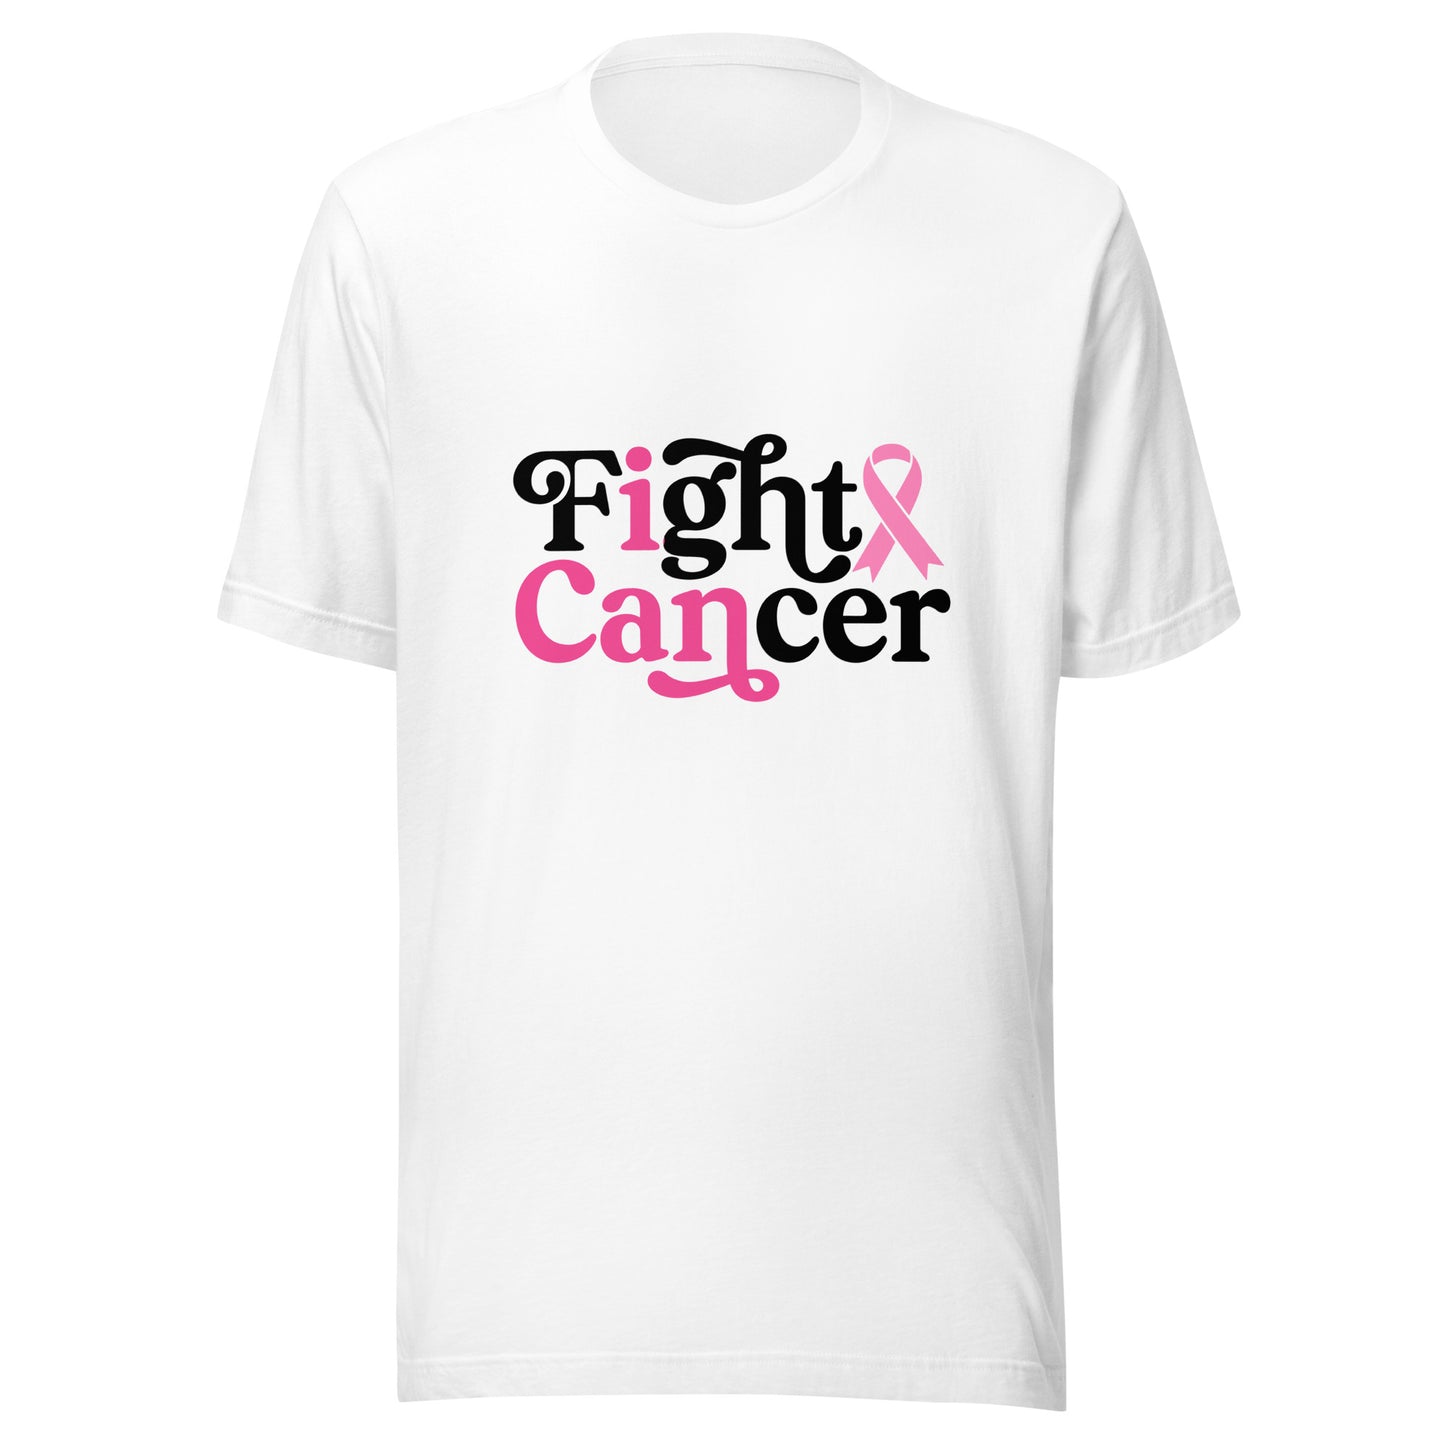 I Can Fight Cancer - Pink Ribbon - Breast Cancer Awareness - Survivors - Warriors Unisex T-shirt